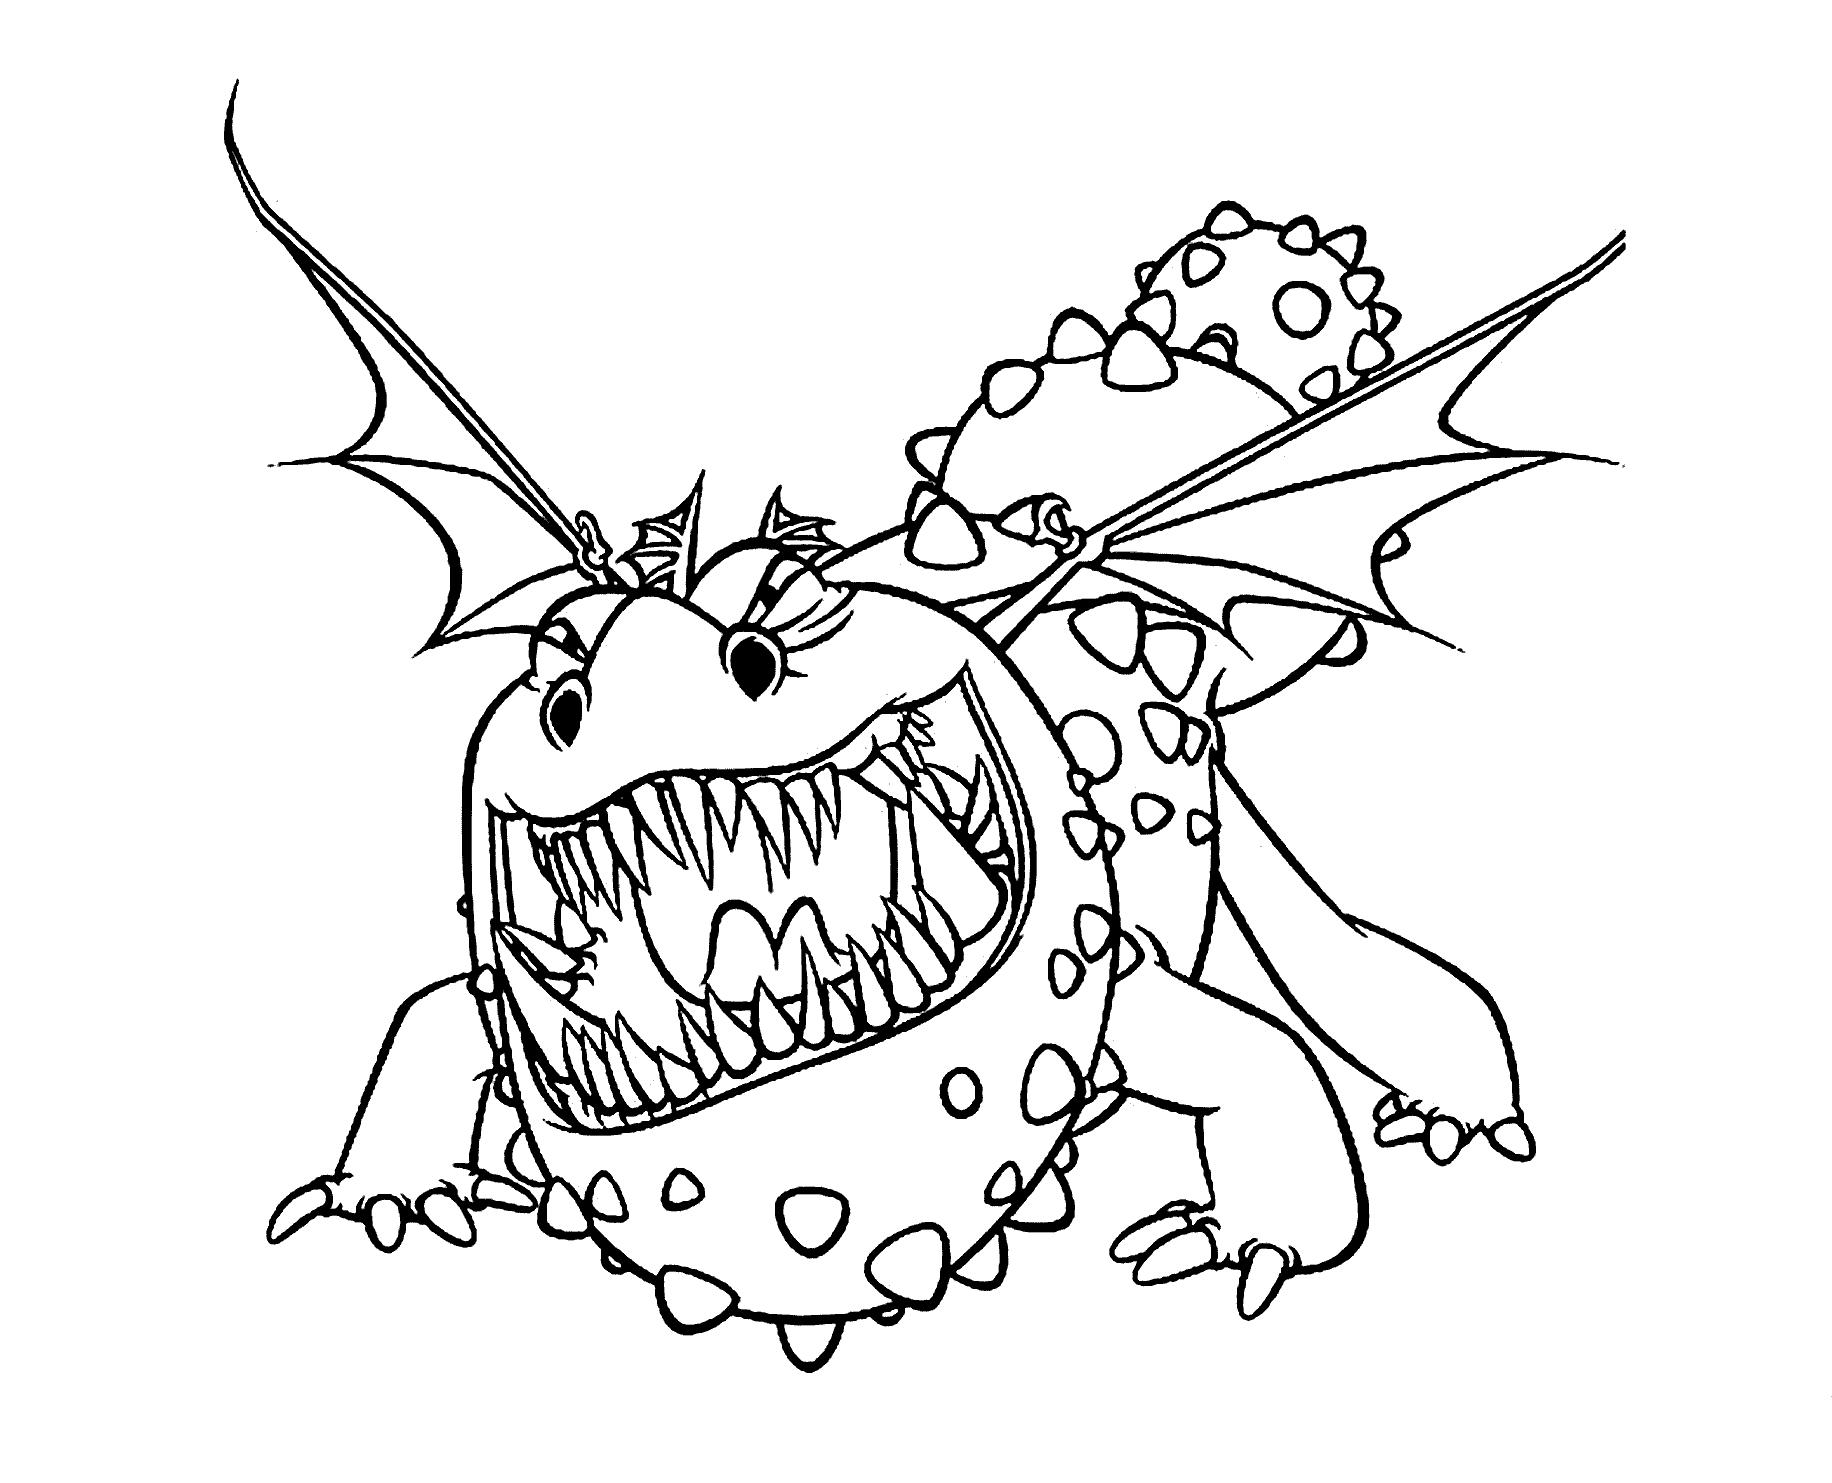 how to train a dragon coloring pages coloring pages for everyone how to train your dragon train a dragon coloring to pages how 